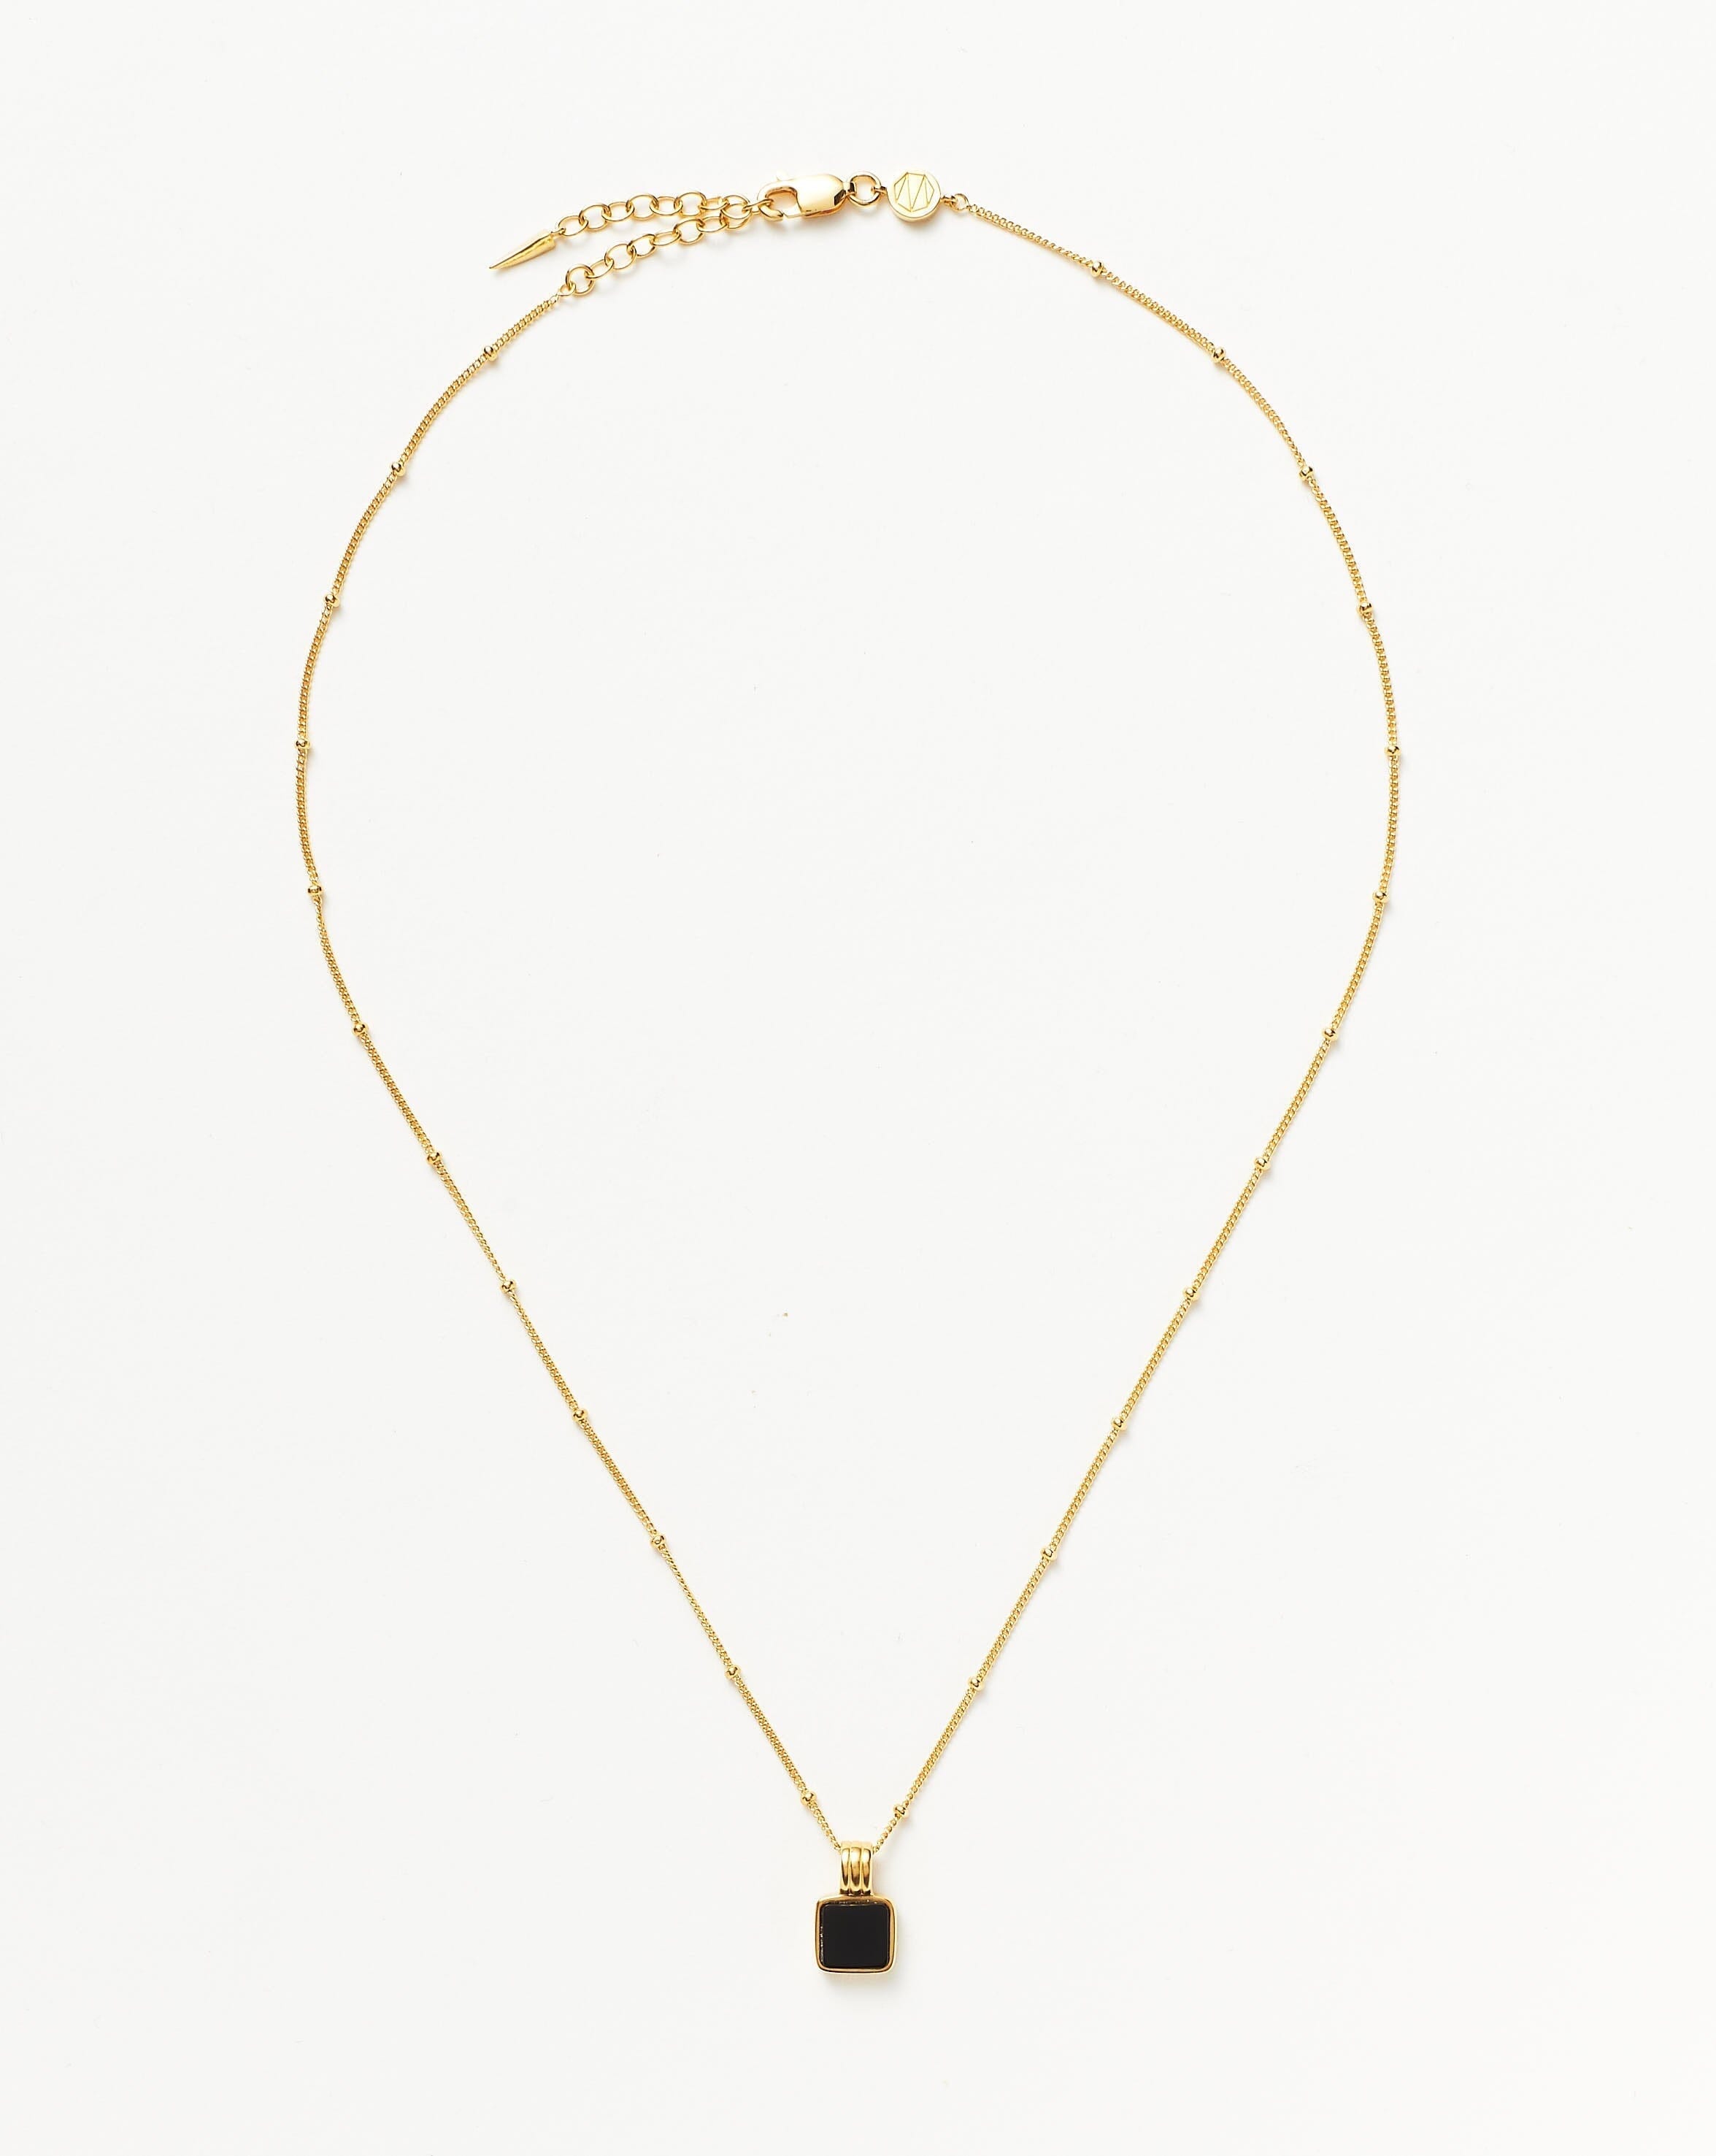 Lucy Williams Square Onyx Gemstone Necklace | 18ct Gold Plated  Vermeil/Black Onyx